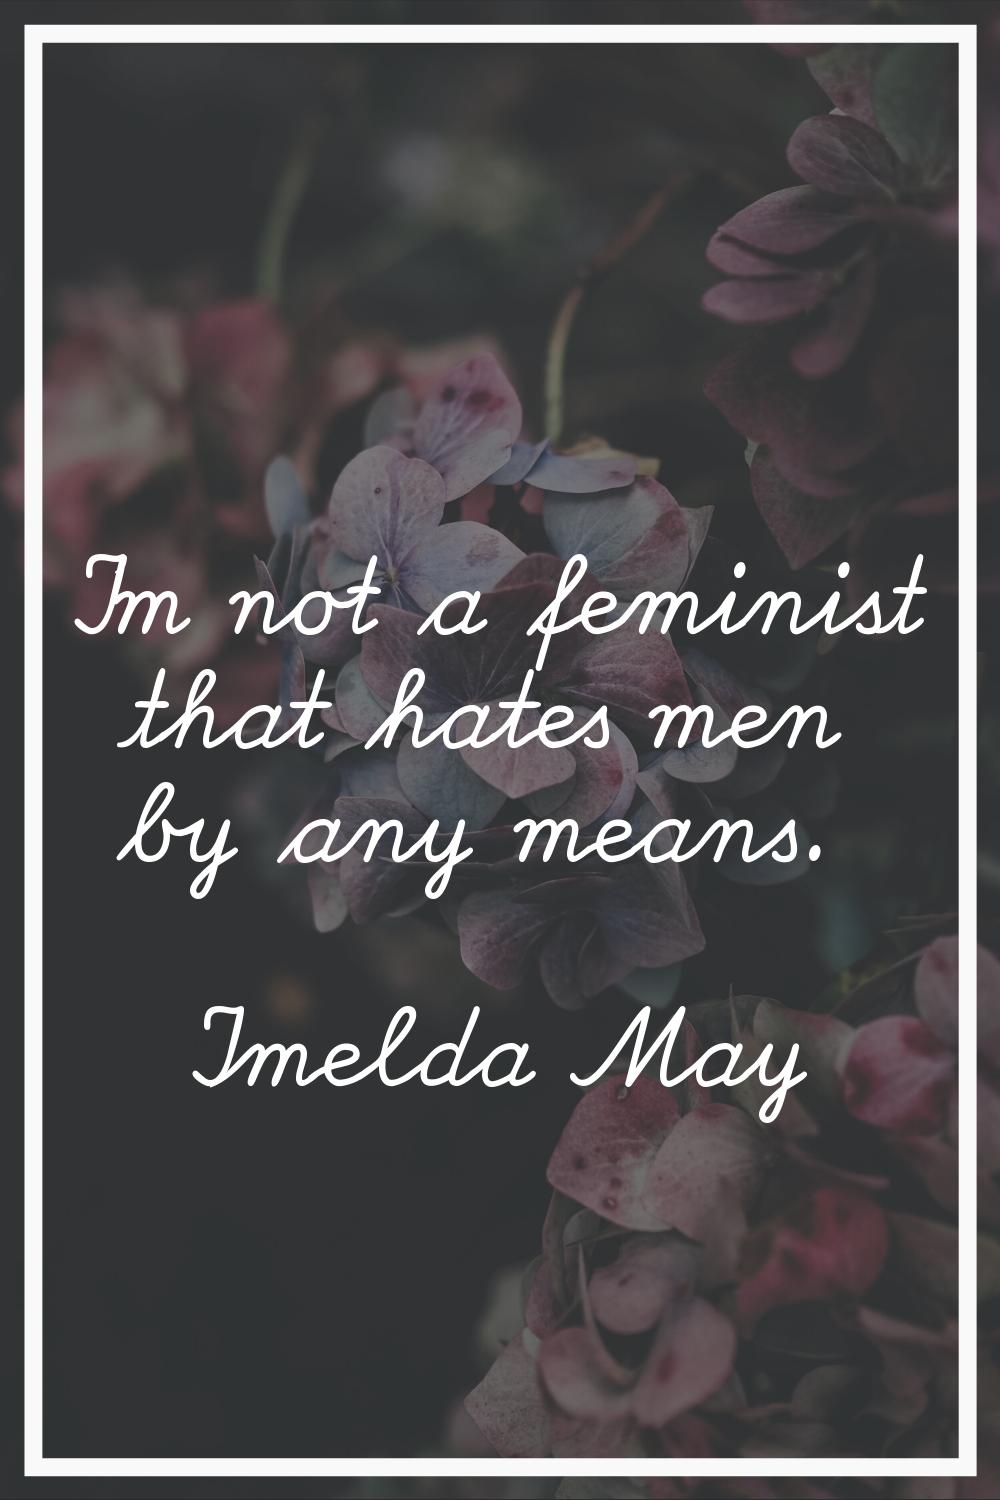 I'm not a feminist that hates men by any means.